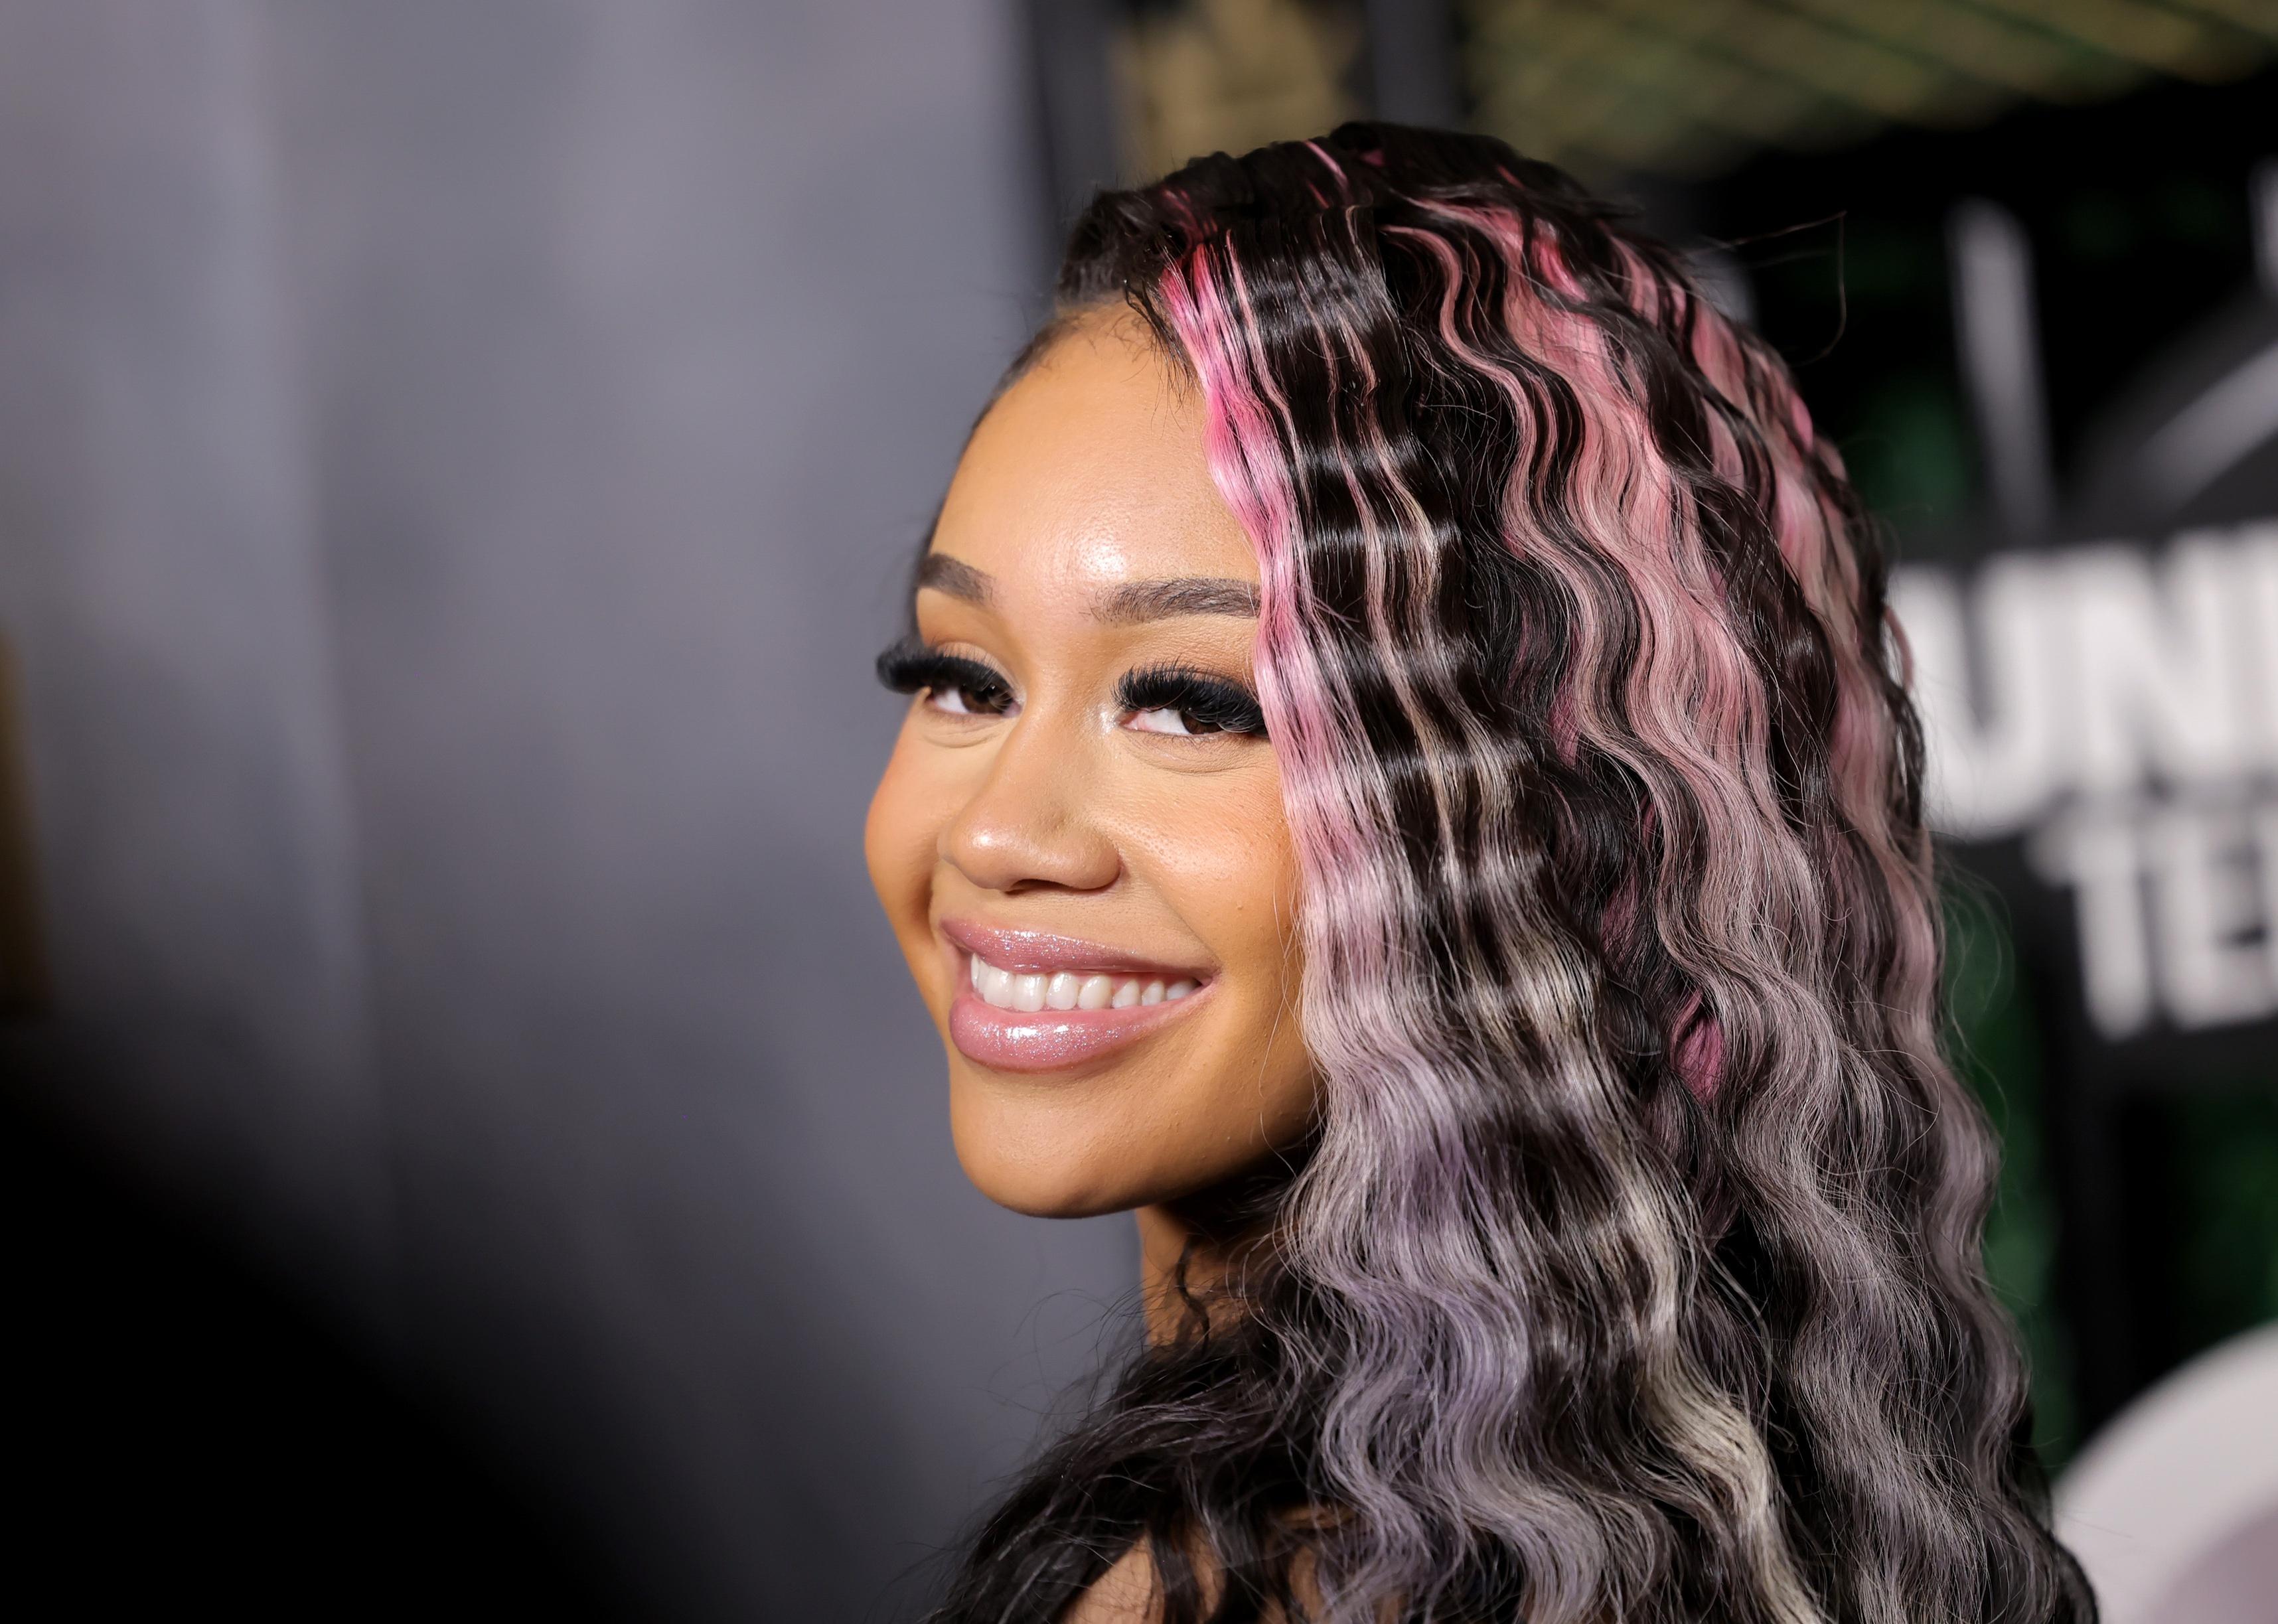 Saweetie posing for a picture with pink highlights in her hair.